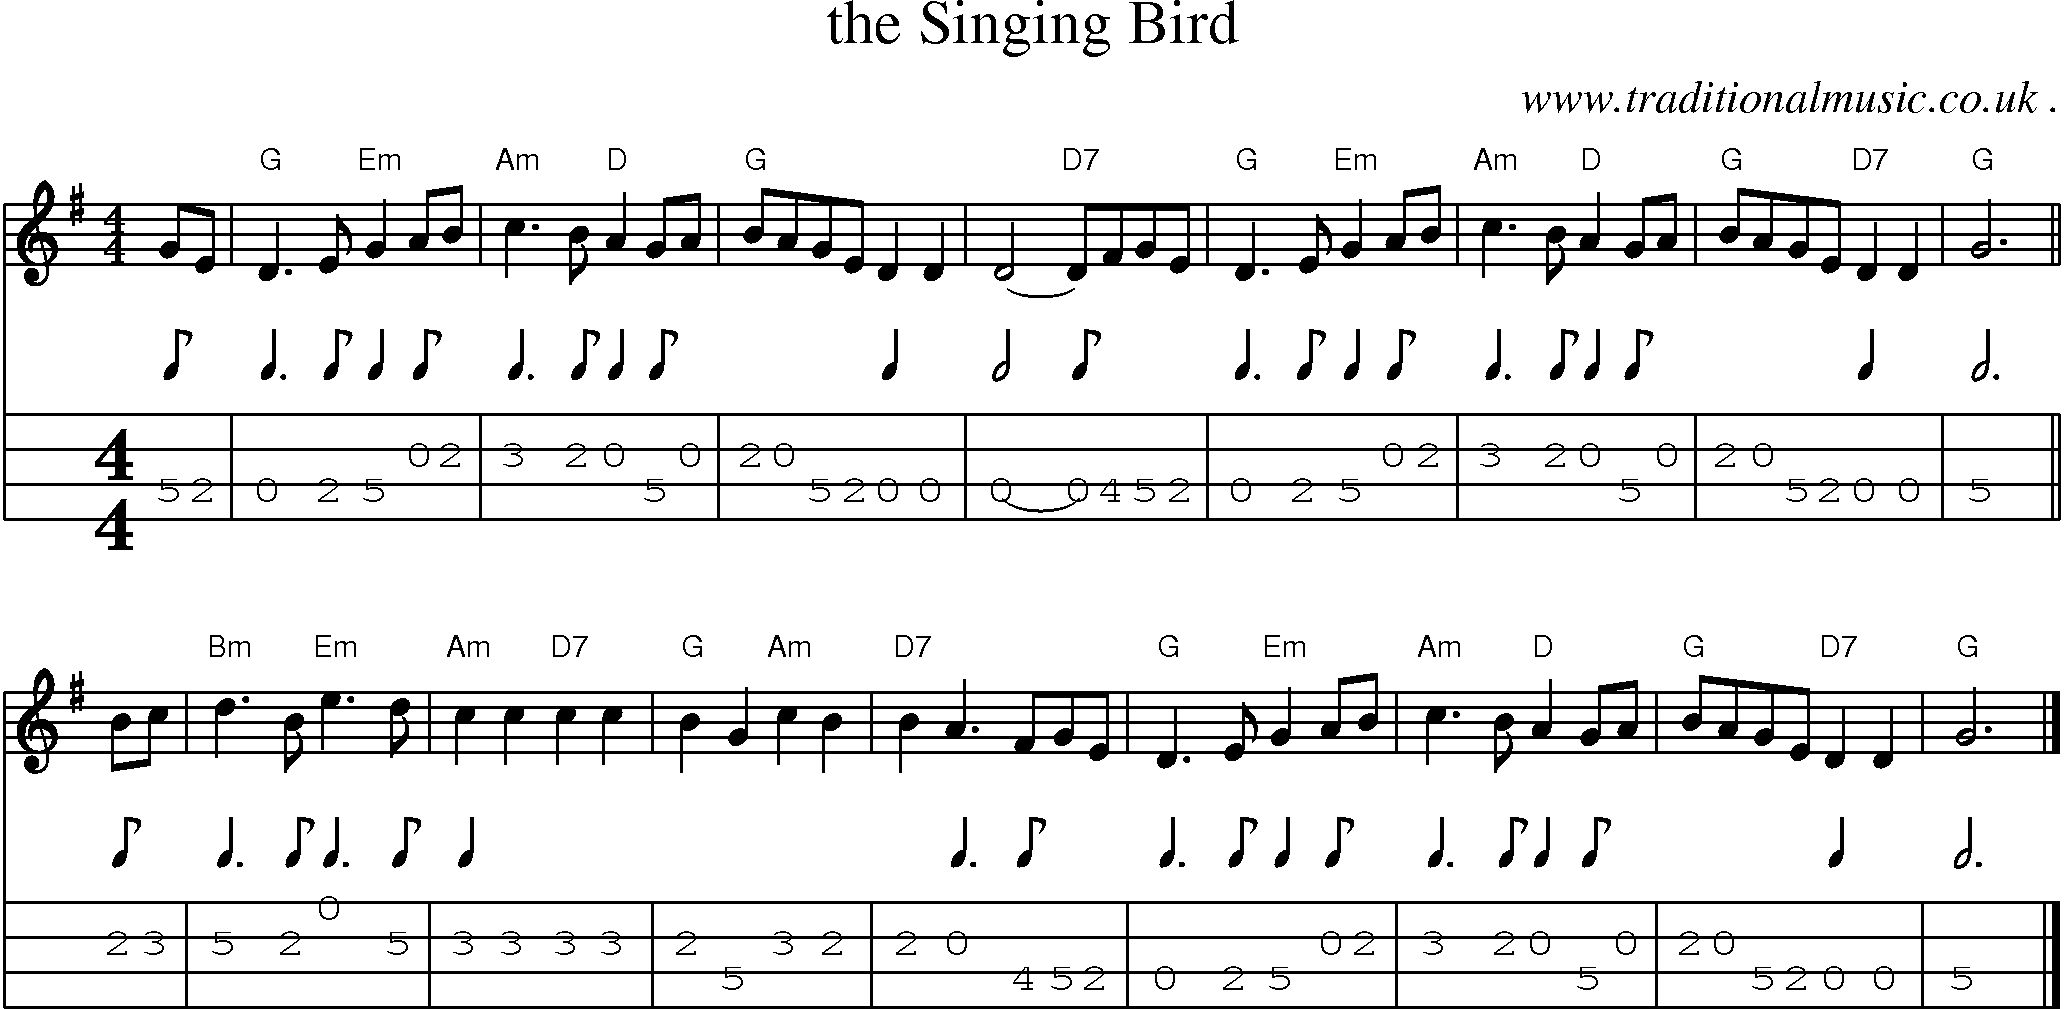 Sheet-music  score, Chords and Mandolin Tabs for The Singing Bird